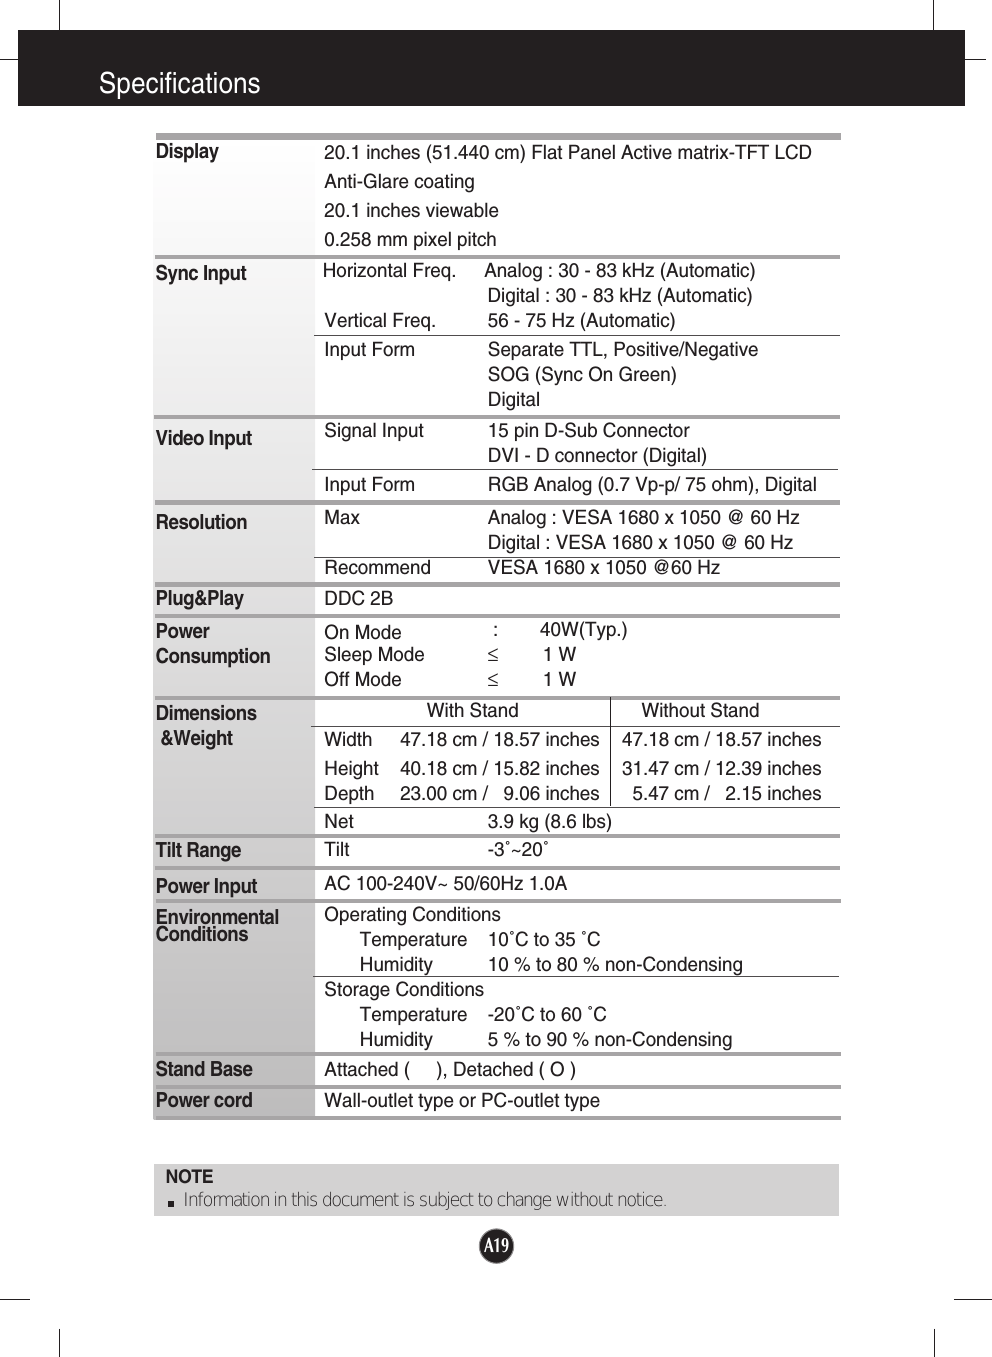 A19Specifications        NOTEInformation in this document is subject to change without notice.DisplaySync InputVideo InputResolutionPlug&amp;PlayPowerConsumptionDimensions&amp;WeightTilt RangePower InputEnvironmentalConditionsStand BasePower cord 20.1 inches (51.440 cm) Flat Panel Active matrix-TFT LCD Anti-Glare coating 20.1 inches viewable0.258 mm pixel pitchHorizontal Freq. Analog : 30 - 83 kHz (Automatic)Digital : 30 - 83 kHz (Automatic)Vertical Freq. 56 - 75 Hz (Automatic)Input Form Separate TTL, Positive/NegativeSOG (Sync On Green) DigitalSignal Input 15 pin D-Sub ConnectorDVI - D connector (Digital)Input Form RGB Analog (0.7 Vp-p/ 75 ohm), DigitalMax Analog : VESA 1680 x 1050 @ 60 HzDigital : VESA 1680 x 1050 @ 60 HzRecommend VESA 1680 x 1050 @60 HzDDC 2BOn Mode : 40W(Typ.)Sleep Mode ≤1 WOff Mode ≤1 WWith Stand Without StandWidth 47.18 cm / 18.57 inches 47.18 cm / 18.57 inchesHeight 40.18 cm / 15.82 inches 31.47 cm / 12.39 inches Depth 23.00 cm /   9.06 inches 5.47 cm /   2.15 inchesNet 3.9 kg (8.6 lbs)Tilt -3˚~20˚AC 100-240V~ 50/60Hz 1.0A Operating ConditionsTemperature 10˚C to 35 ˚CHumidity 10 % to 80 % non-CondensingStorage ConditionsTemperature -20˚C to 60 ˚CHumidity 5 % to 90 % non-CondensingAttached (     ), Detached ( O )Wall-outlet type or PC-outlet type